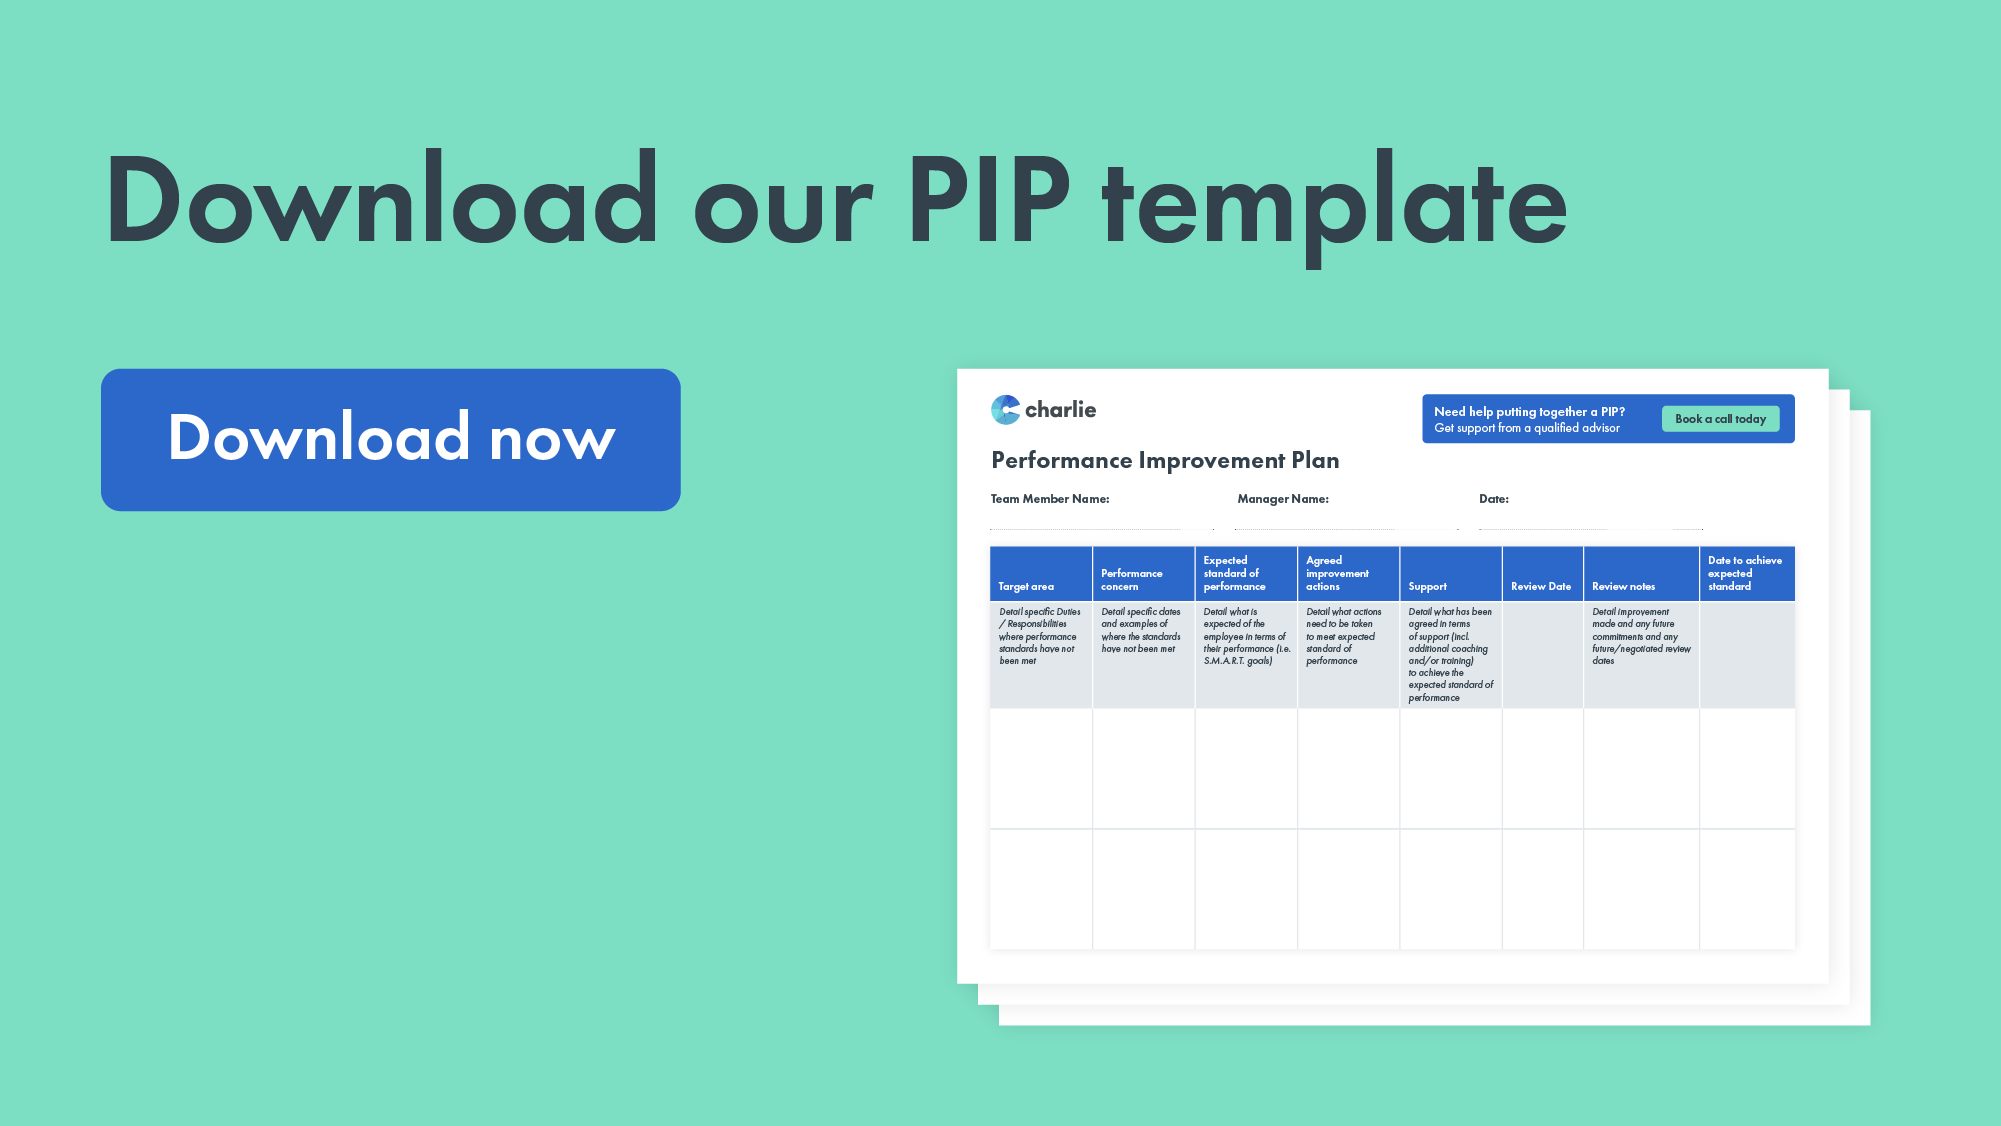 Click here to download our Performance Improvement Plan template